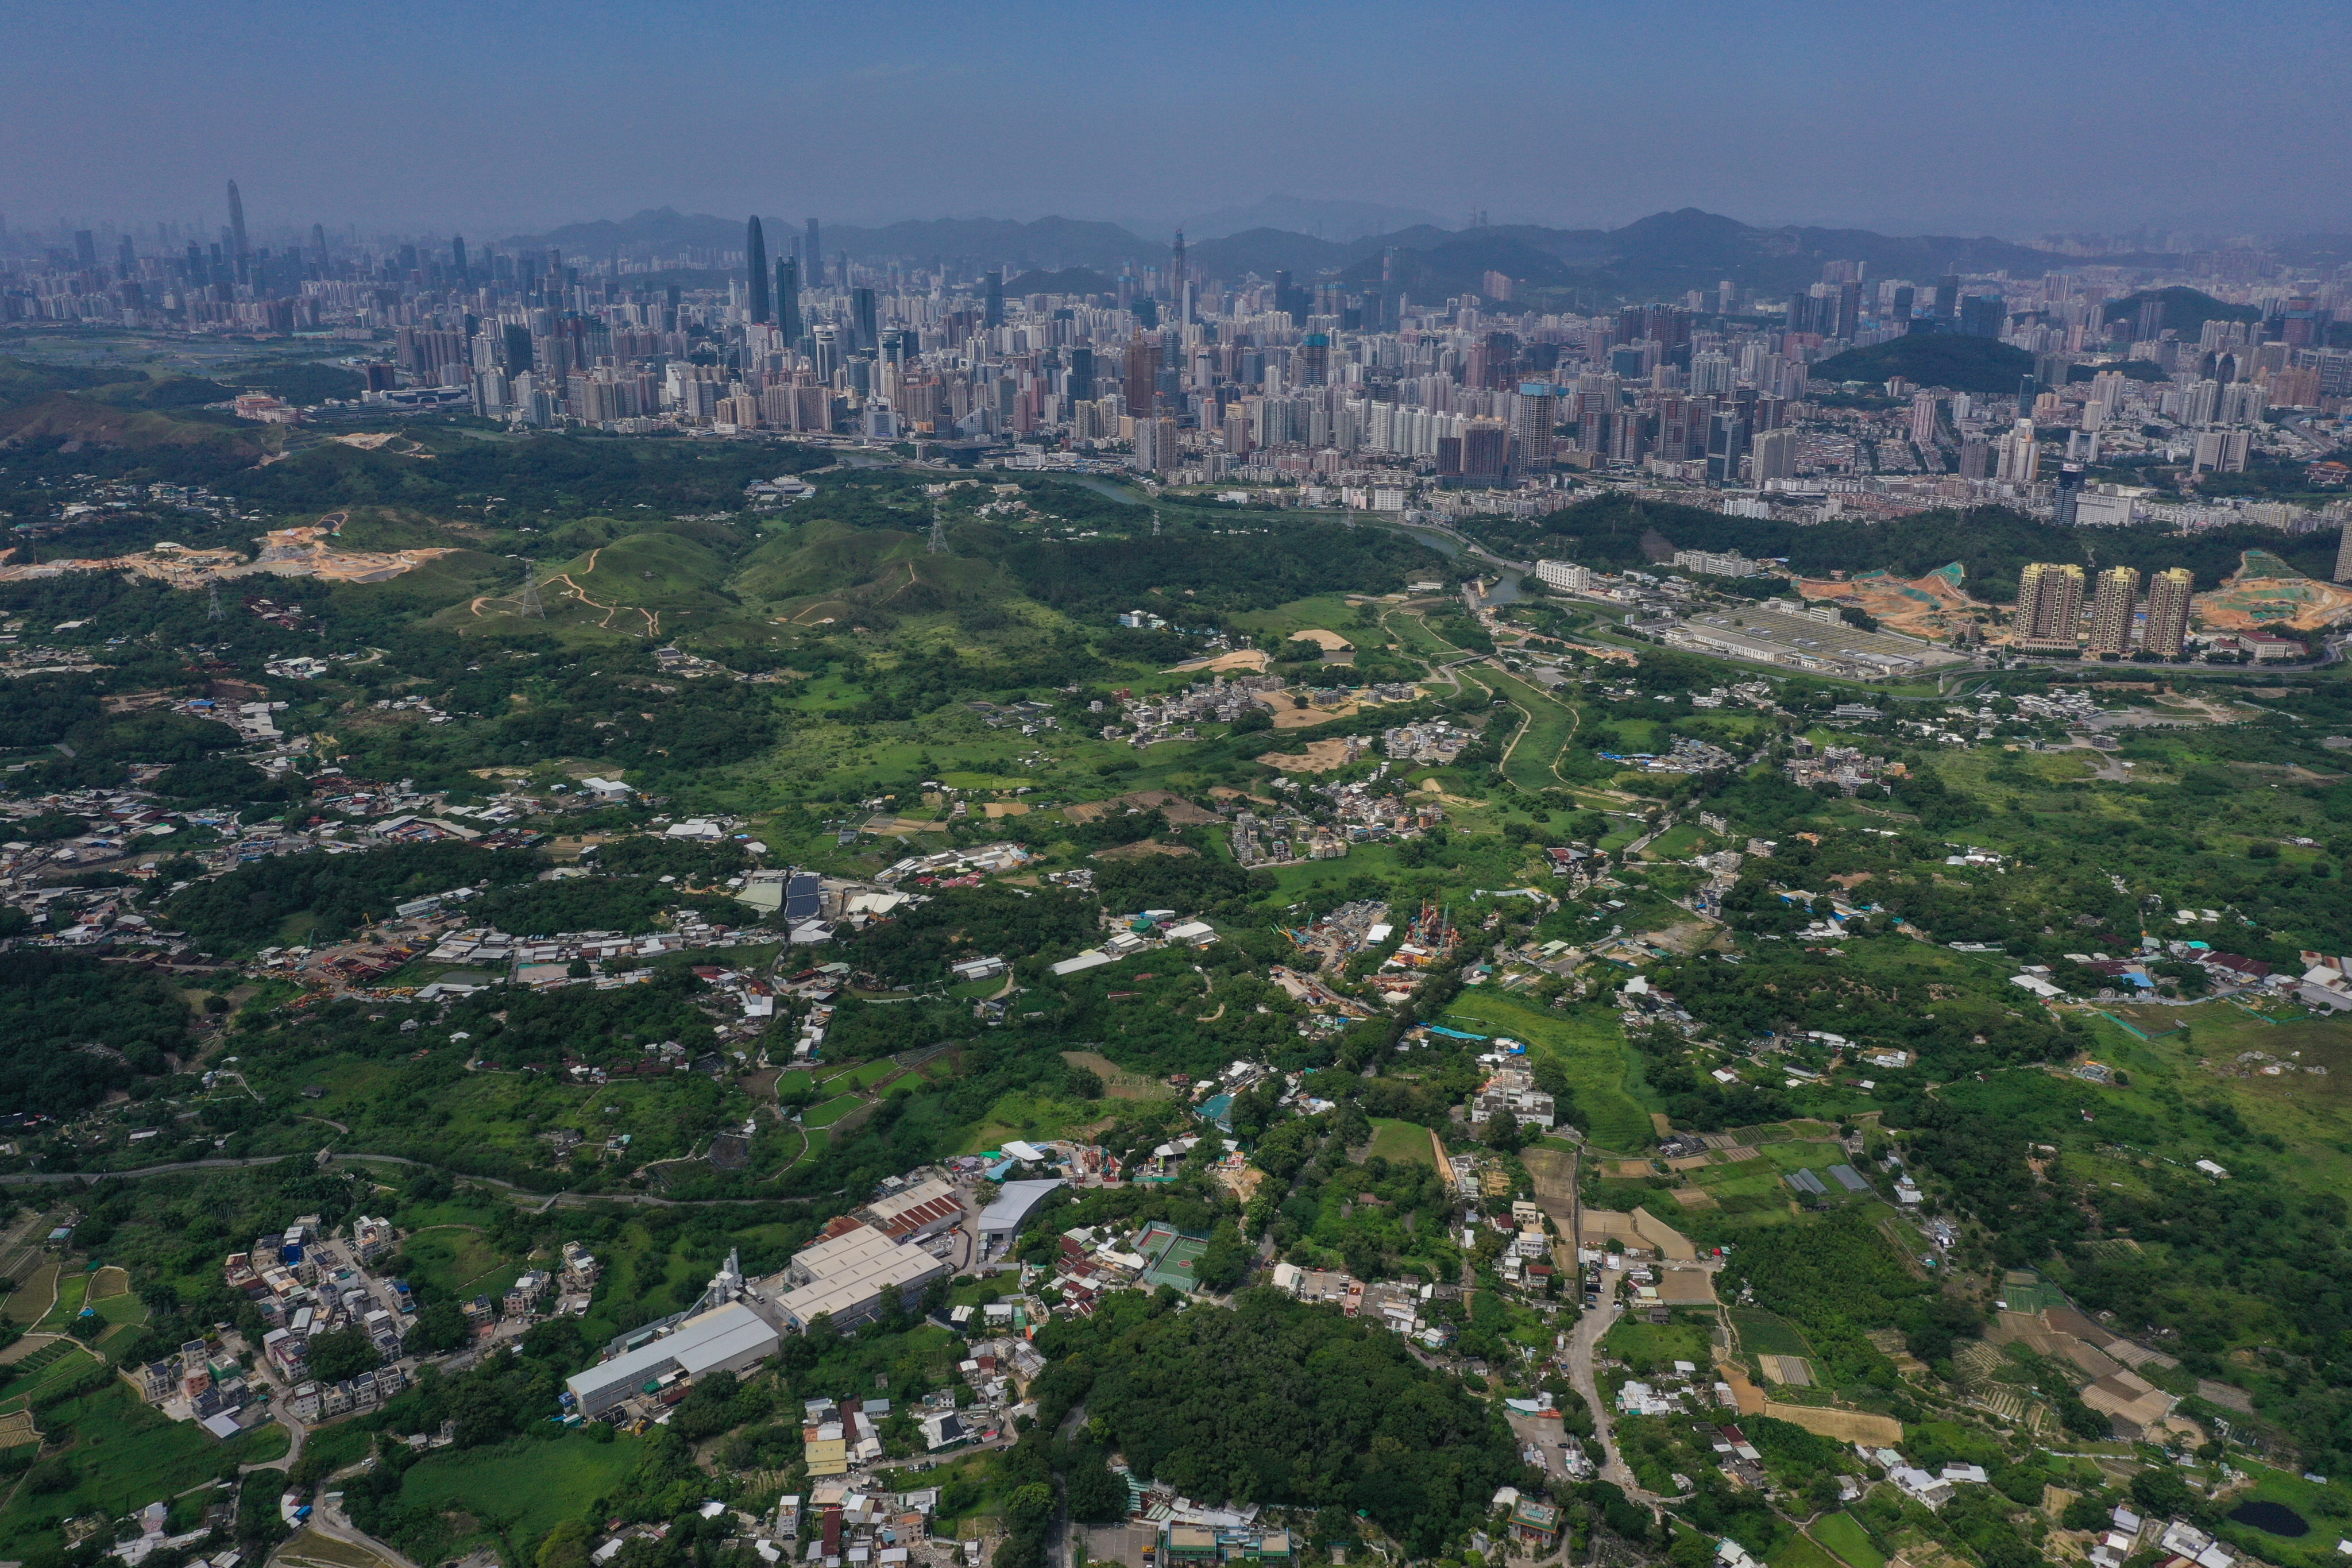 Northern Hong Kong, shown on October 6, with the mainland Chinese city of Shenzhen in the background. Photo: Winson Wong